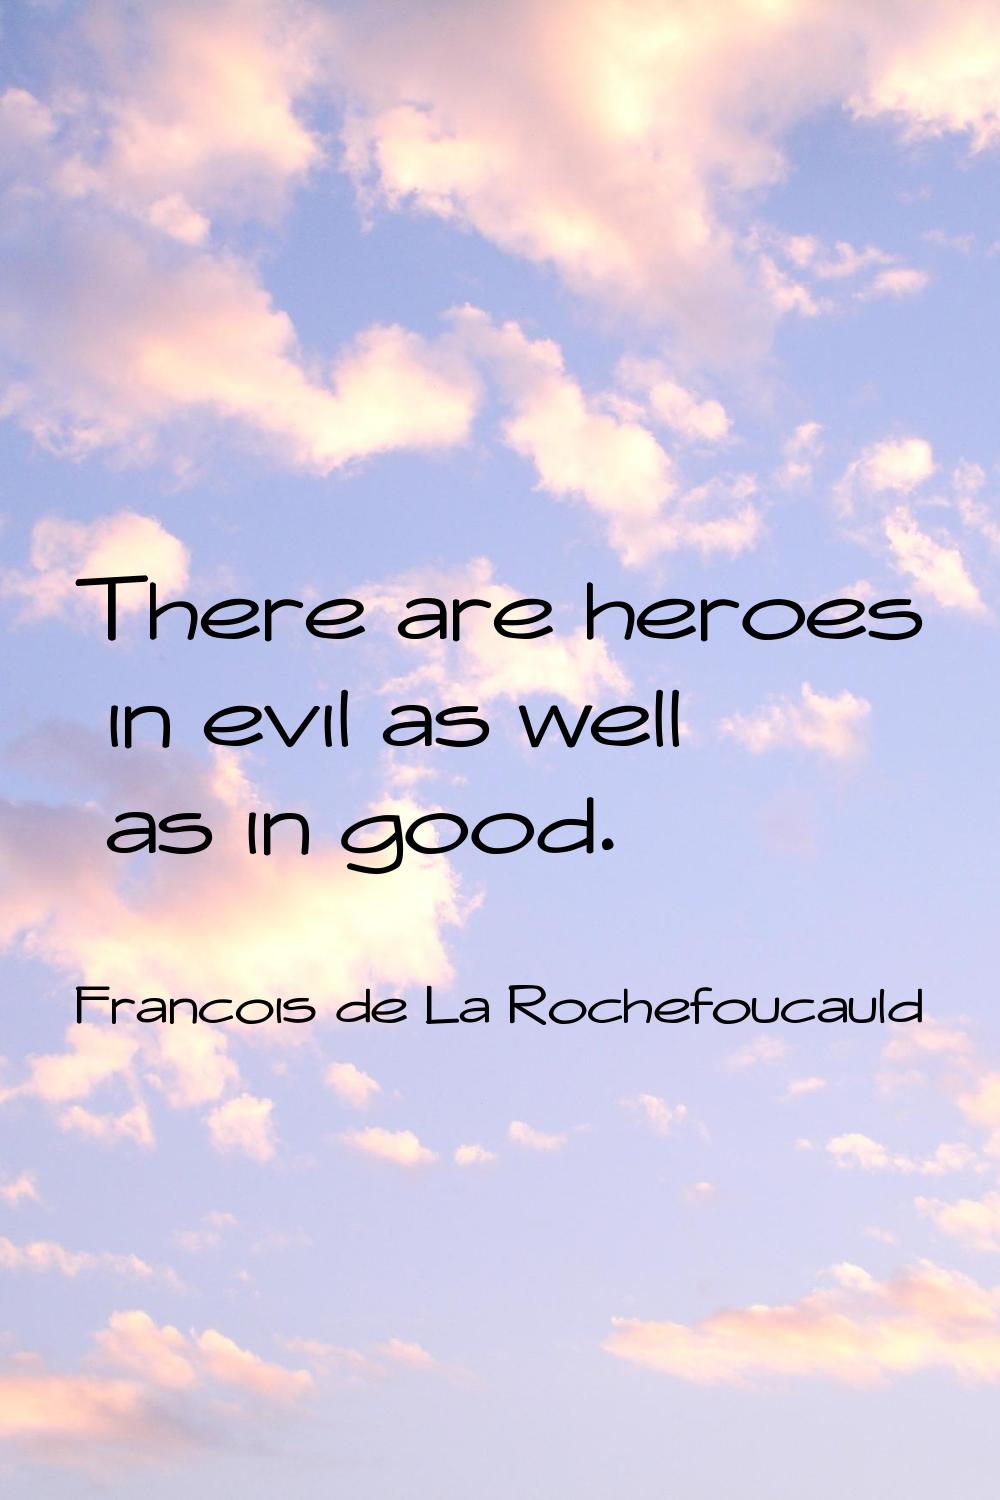 There are heroes in evil as well as in good.